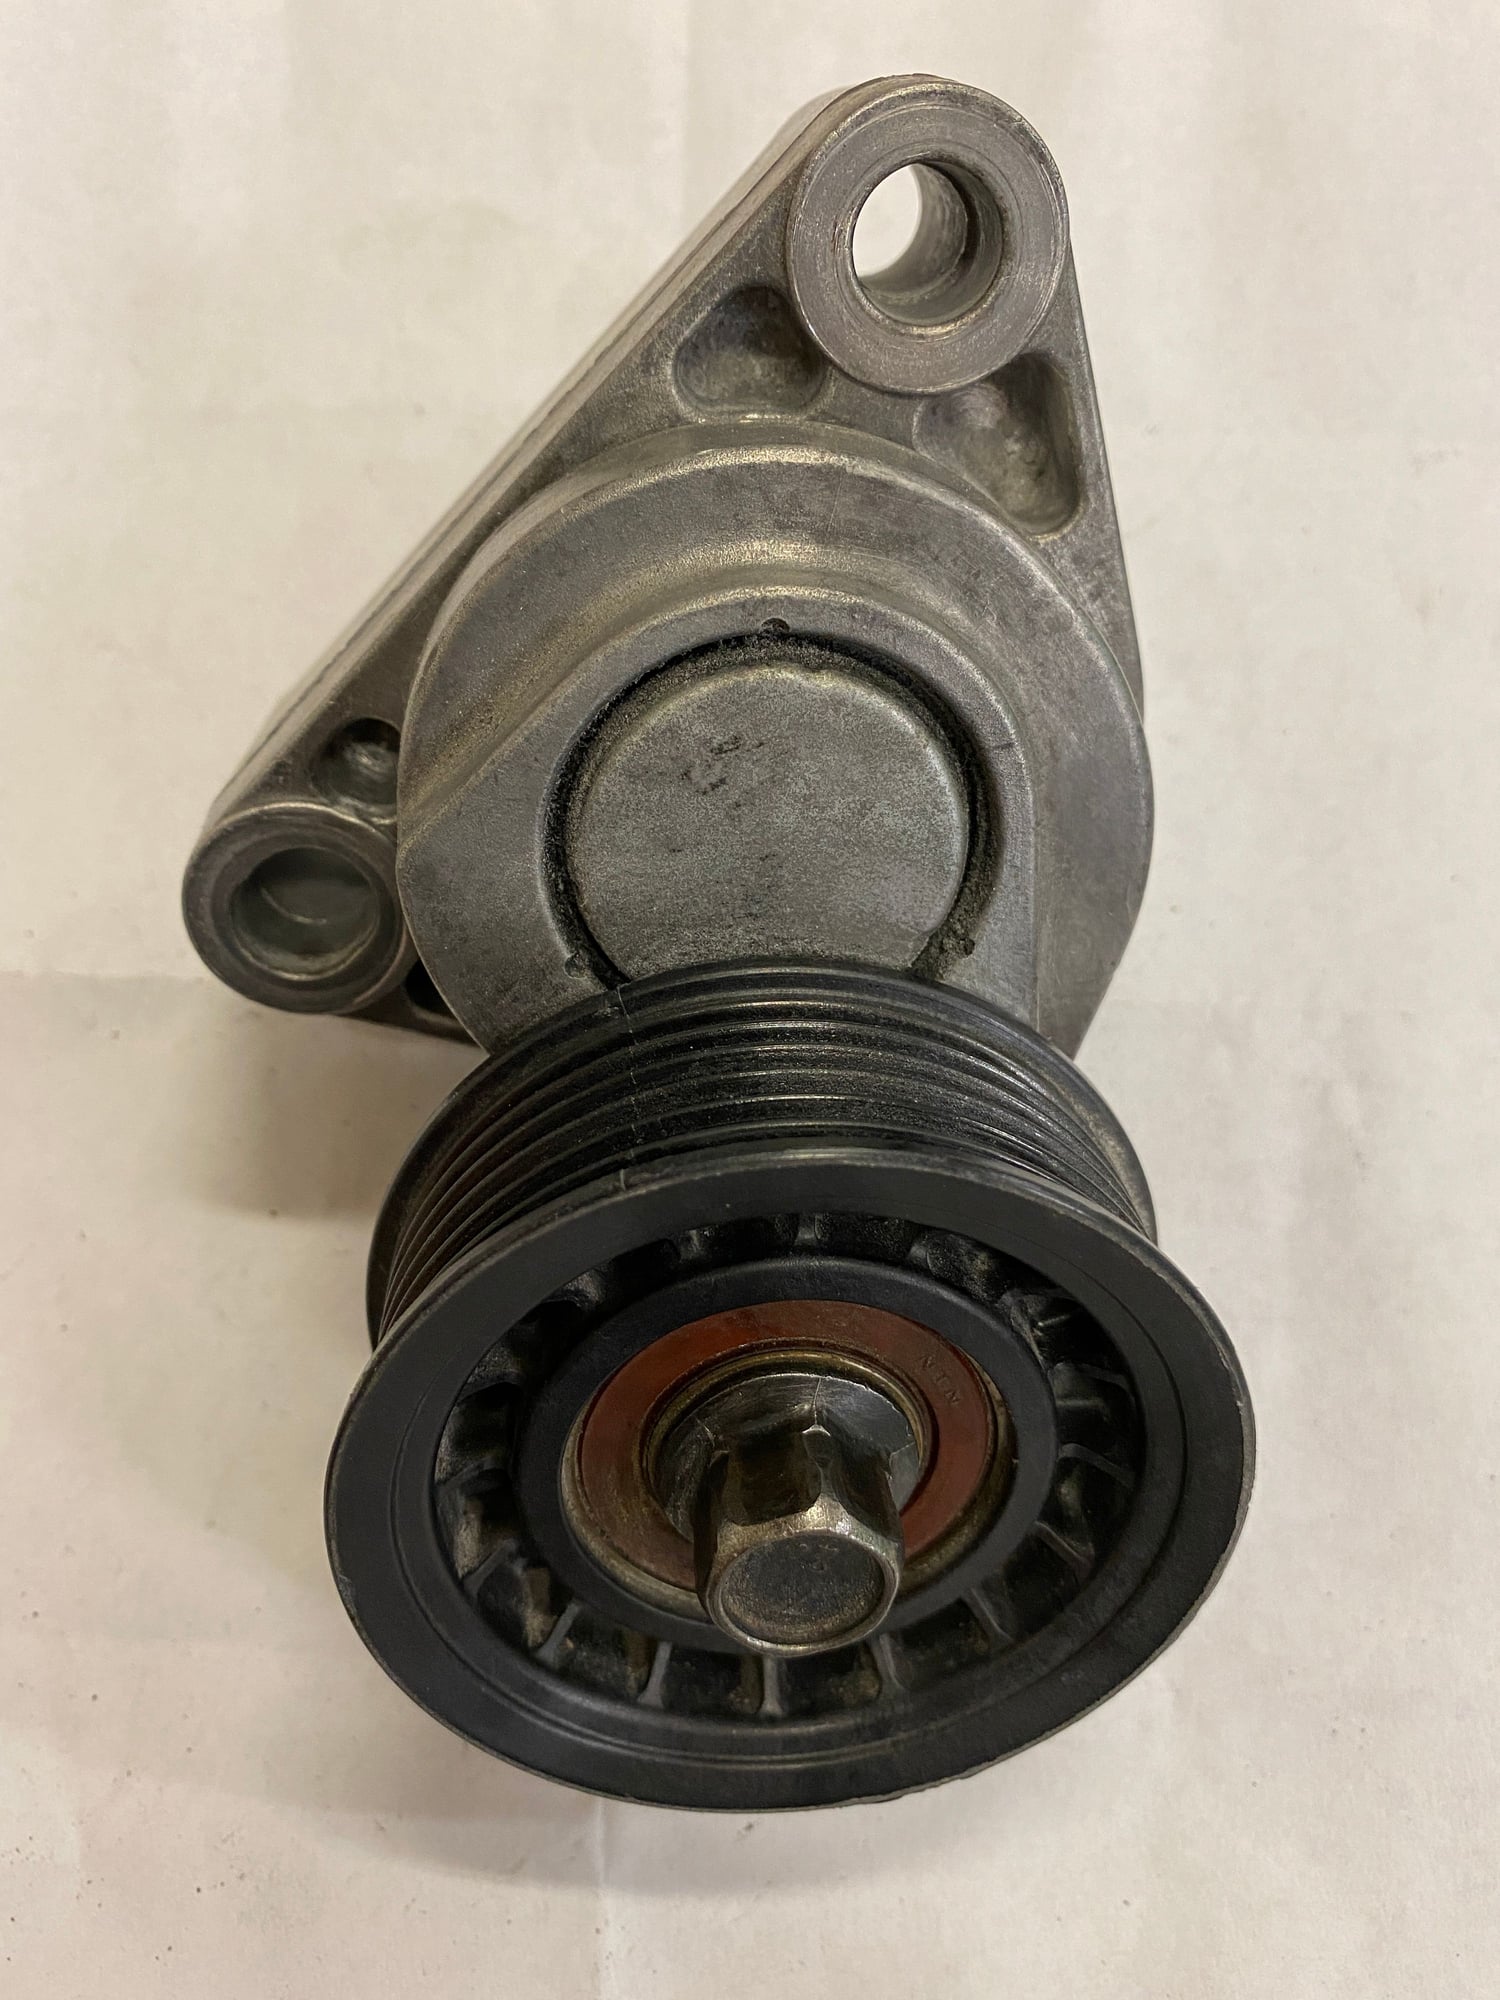 Accessories - F-body belt tensioner - Used - 0  All Models - Elk Grove, CA 95624, United States